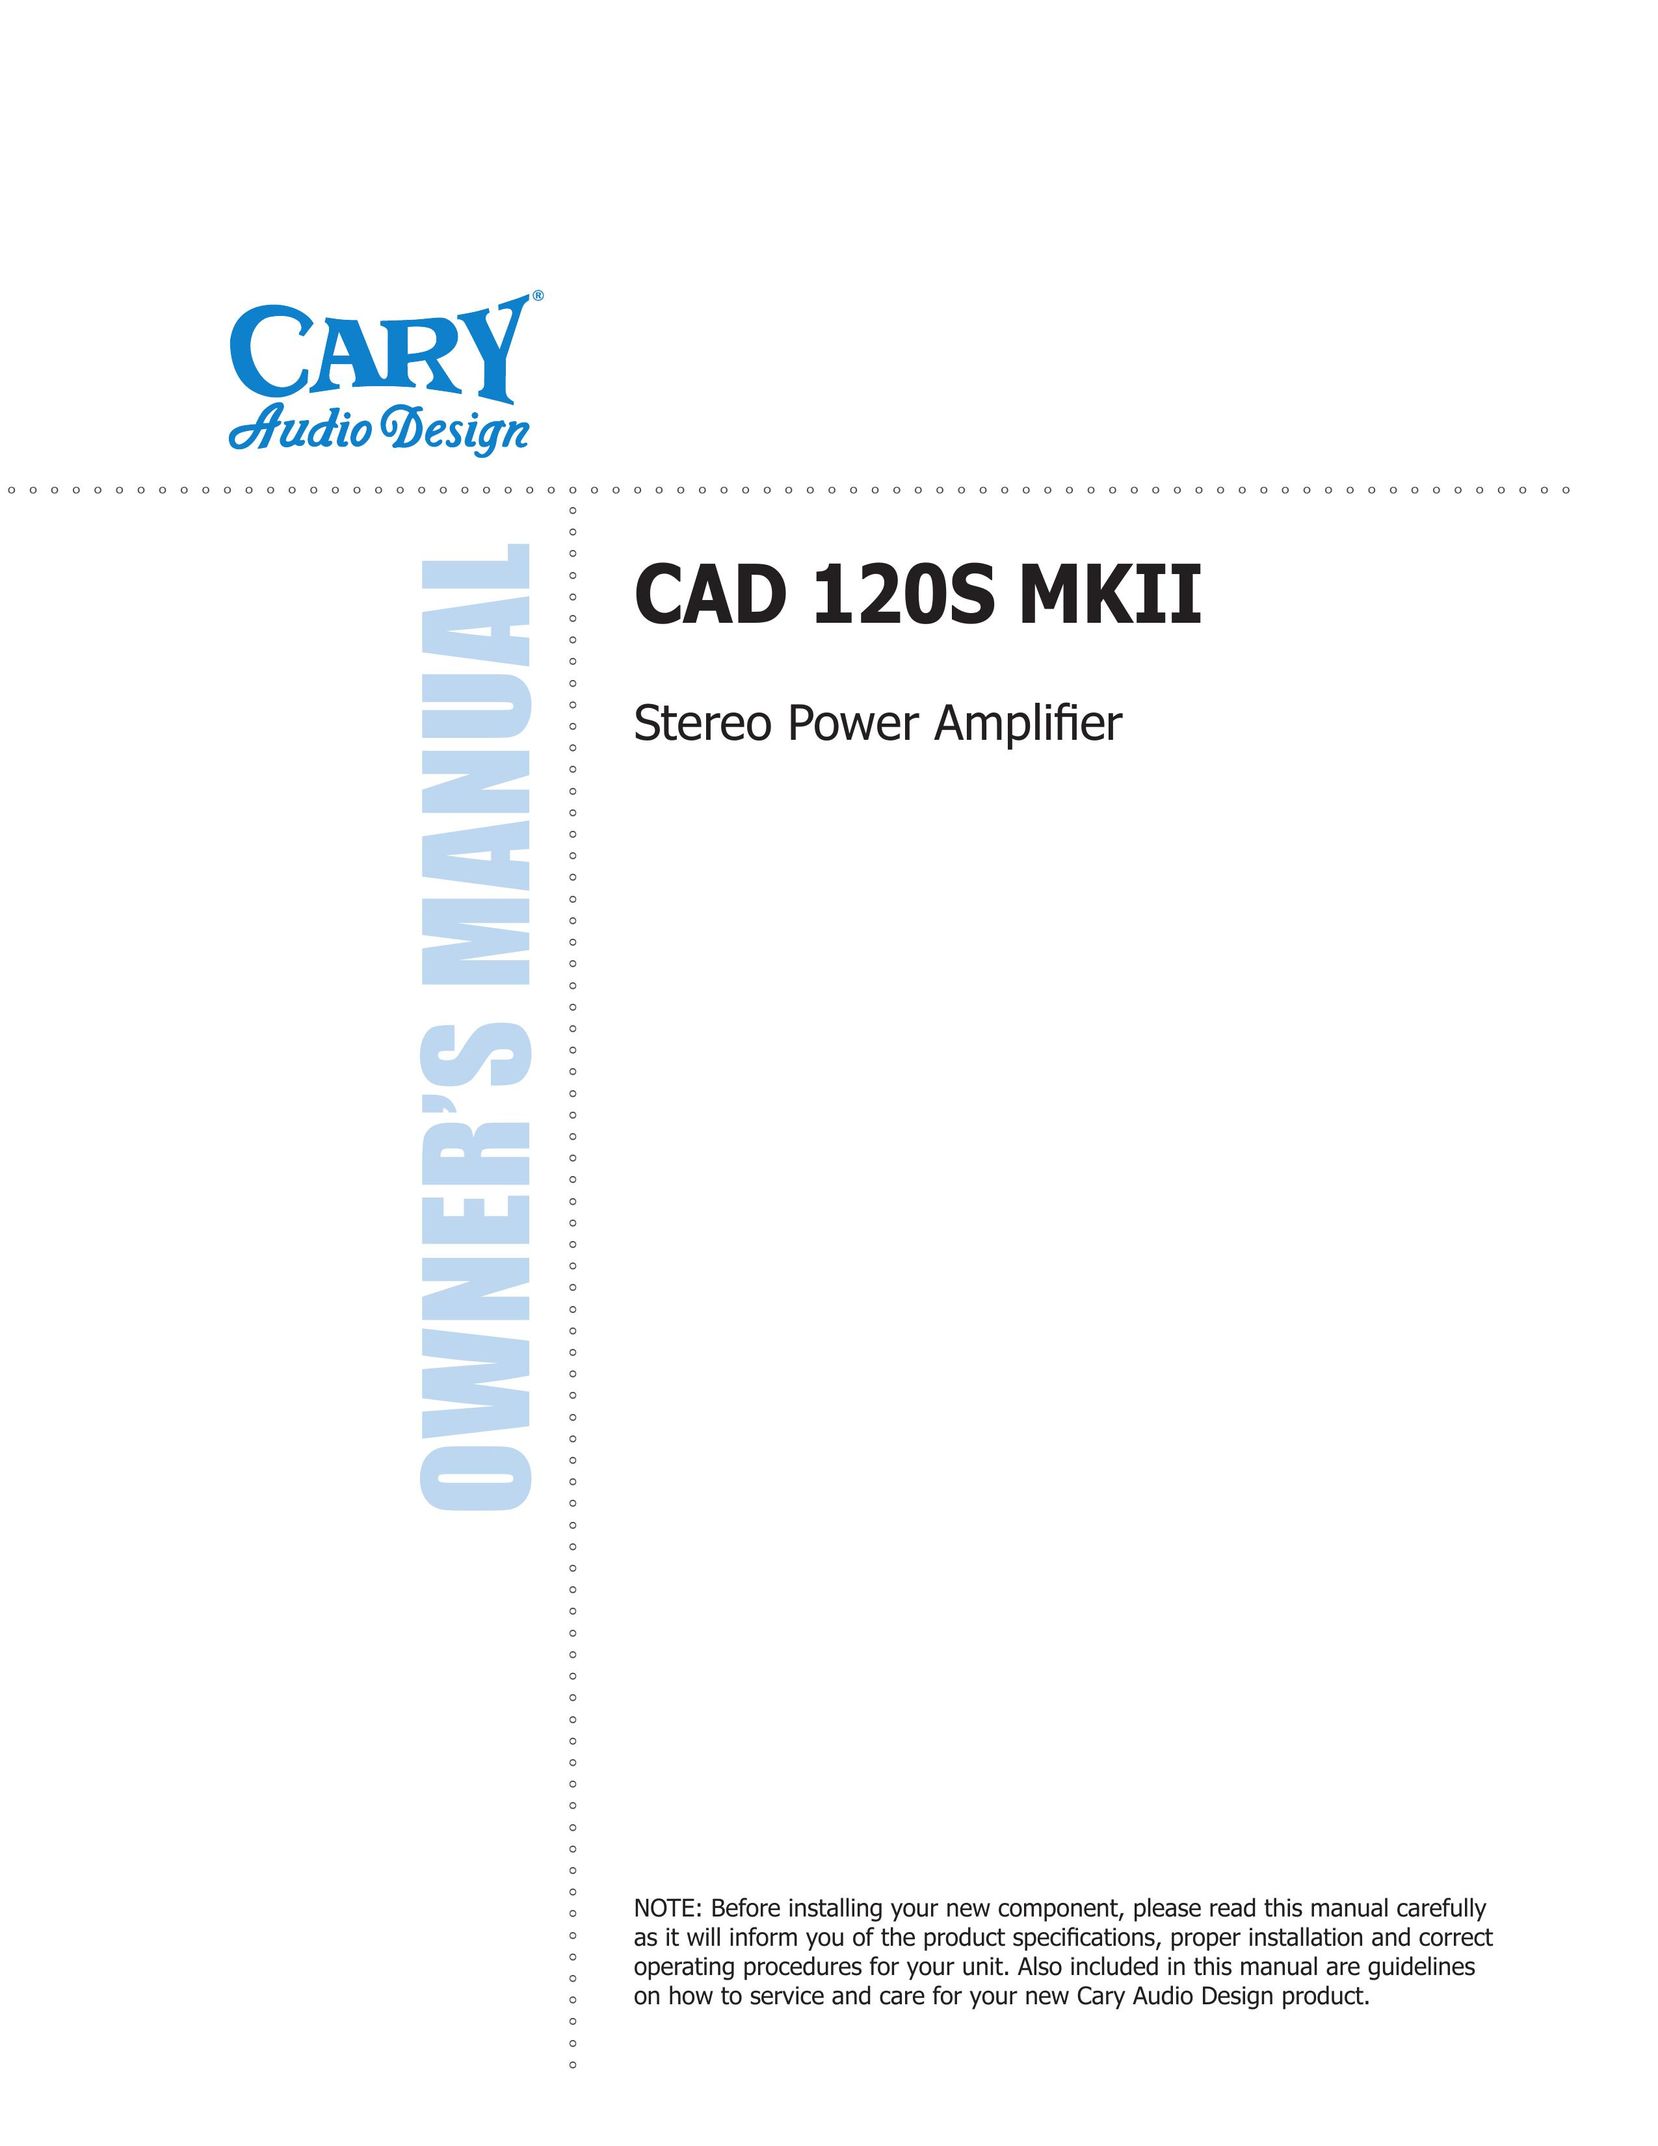 Cary Audio Design CAD 120S MKII Stereo Amplifier User Manual